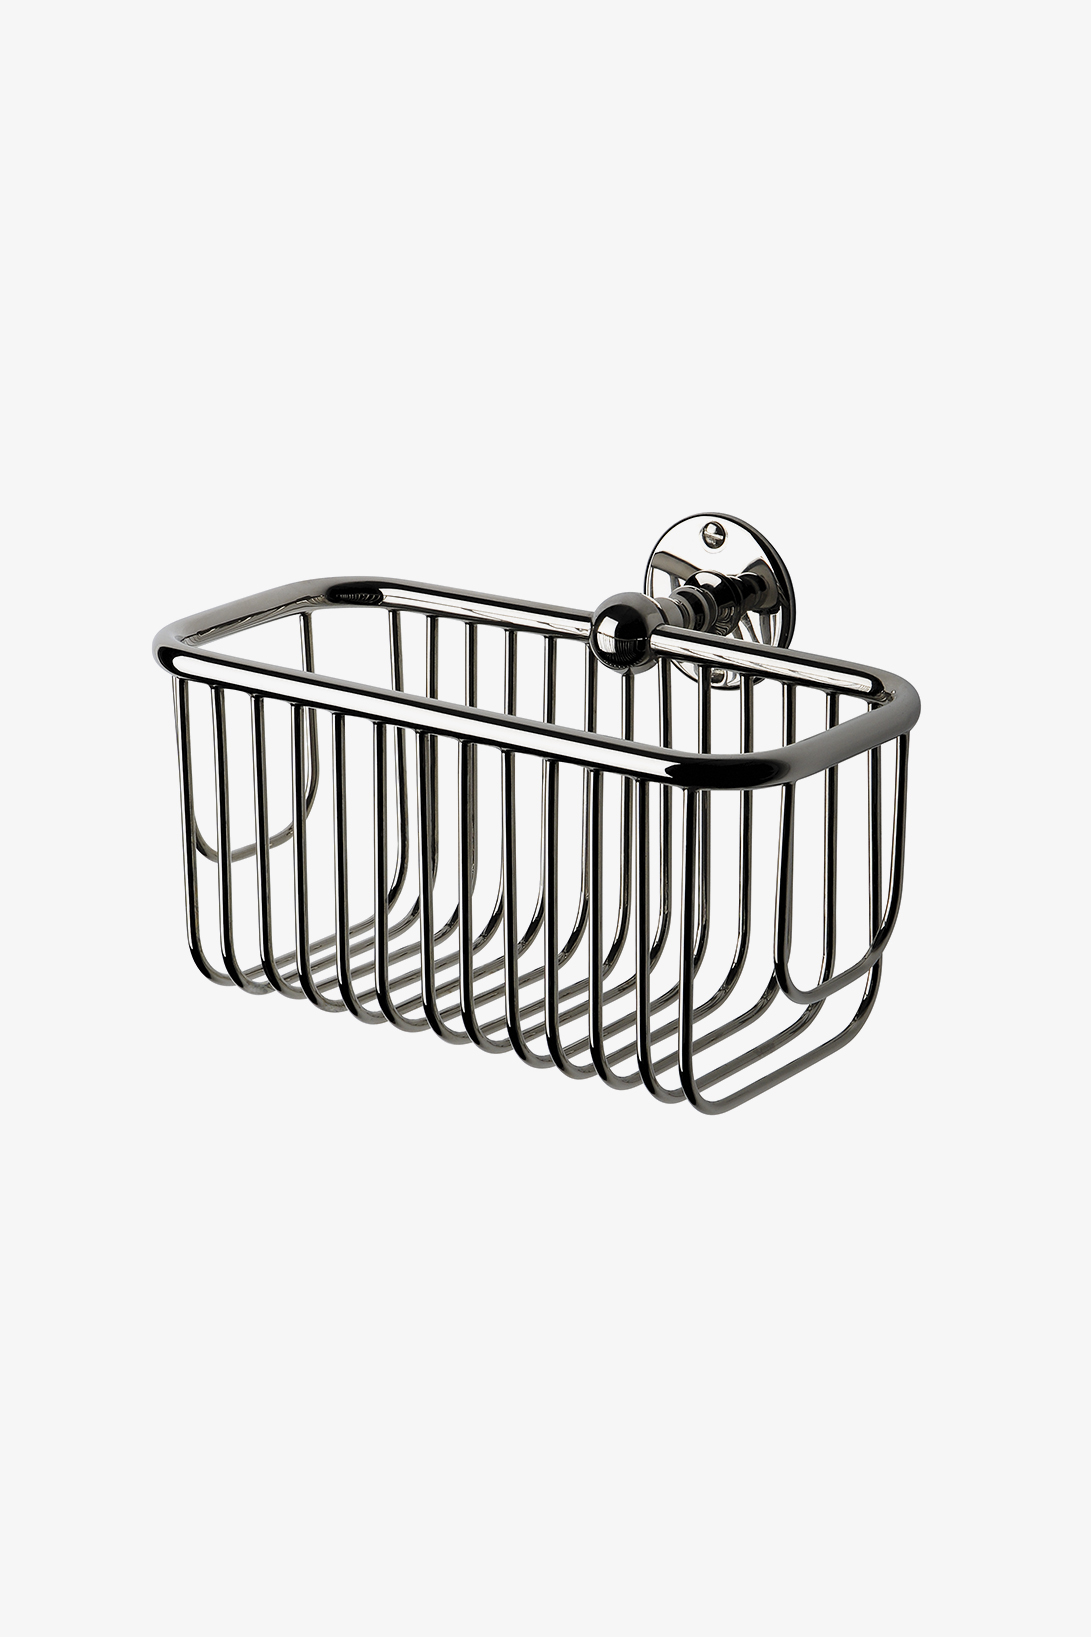 Etoile Wall Mounted Shower Caddy